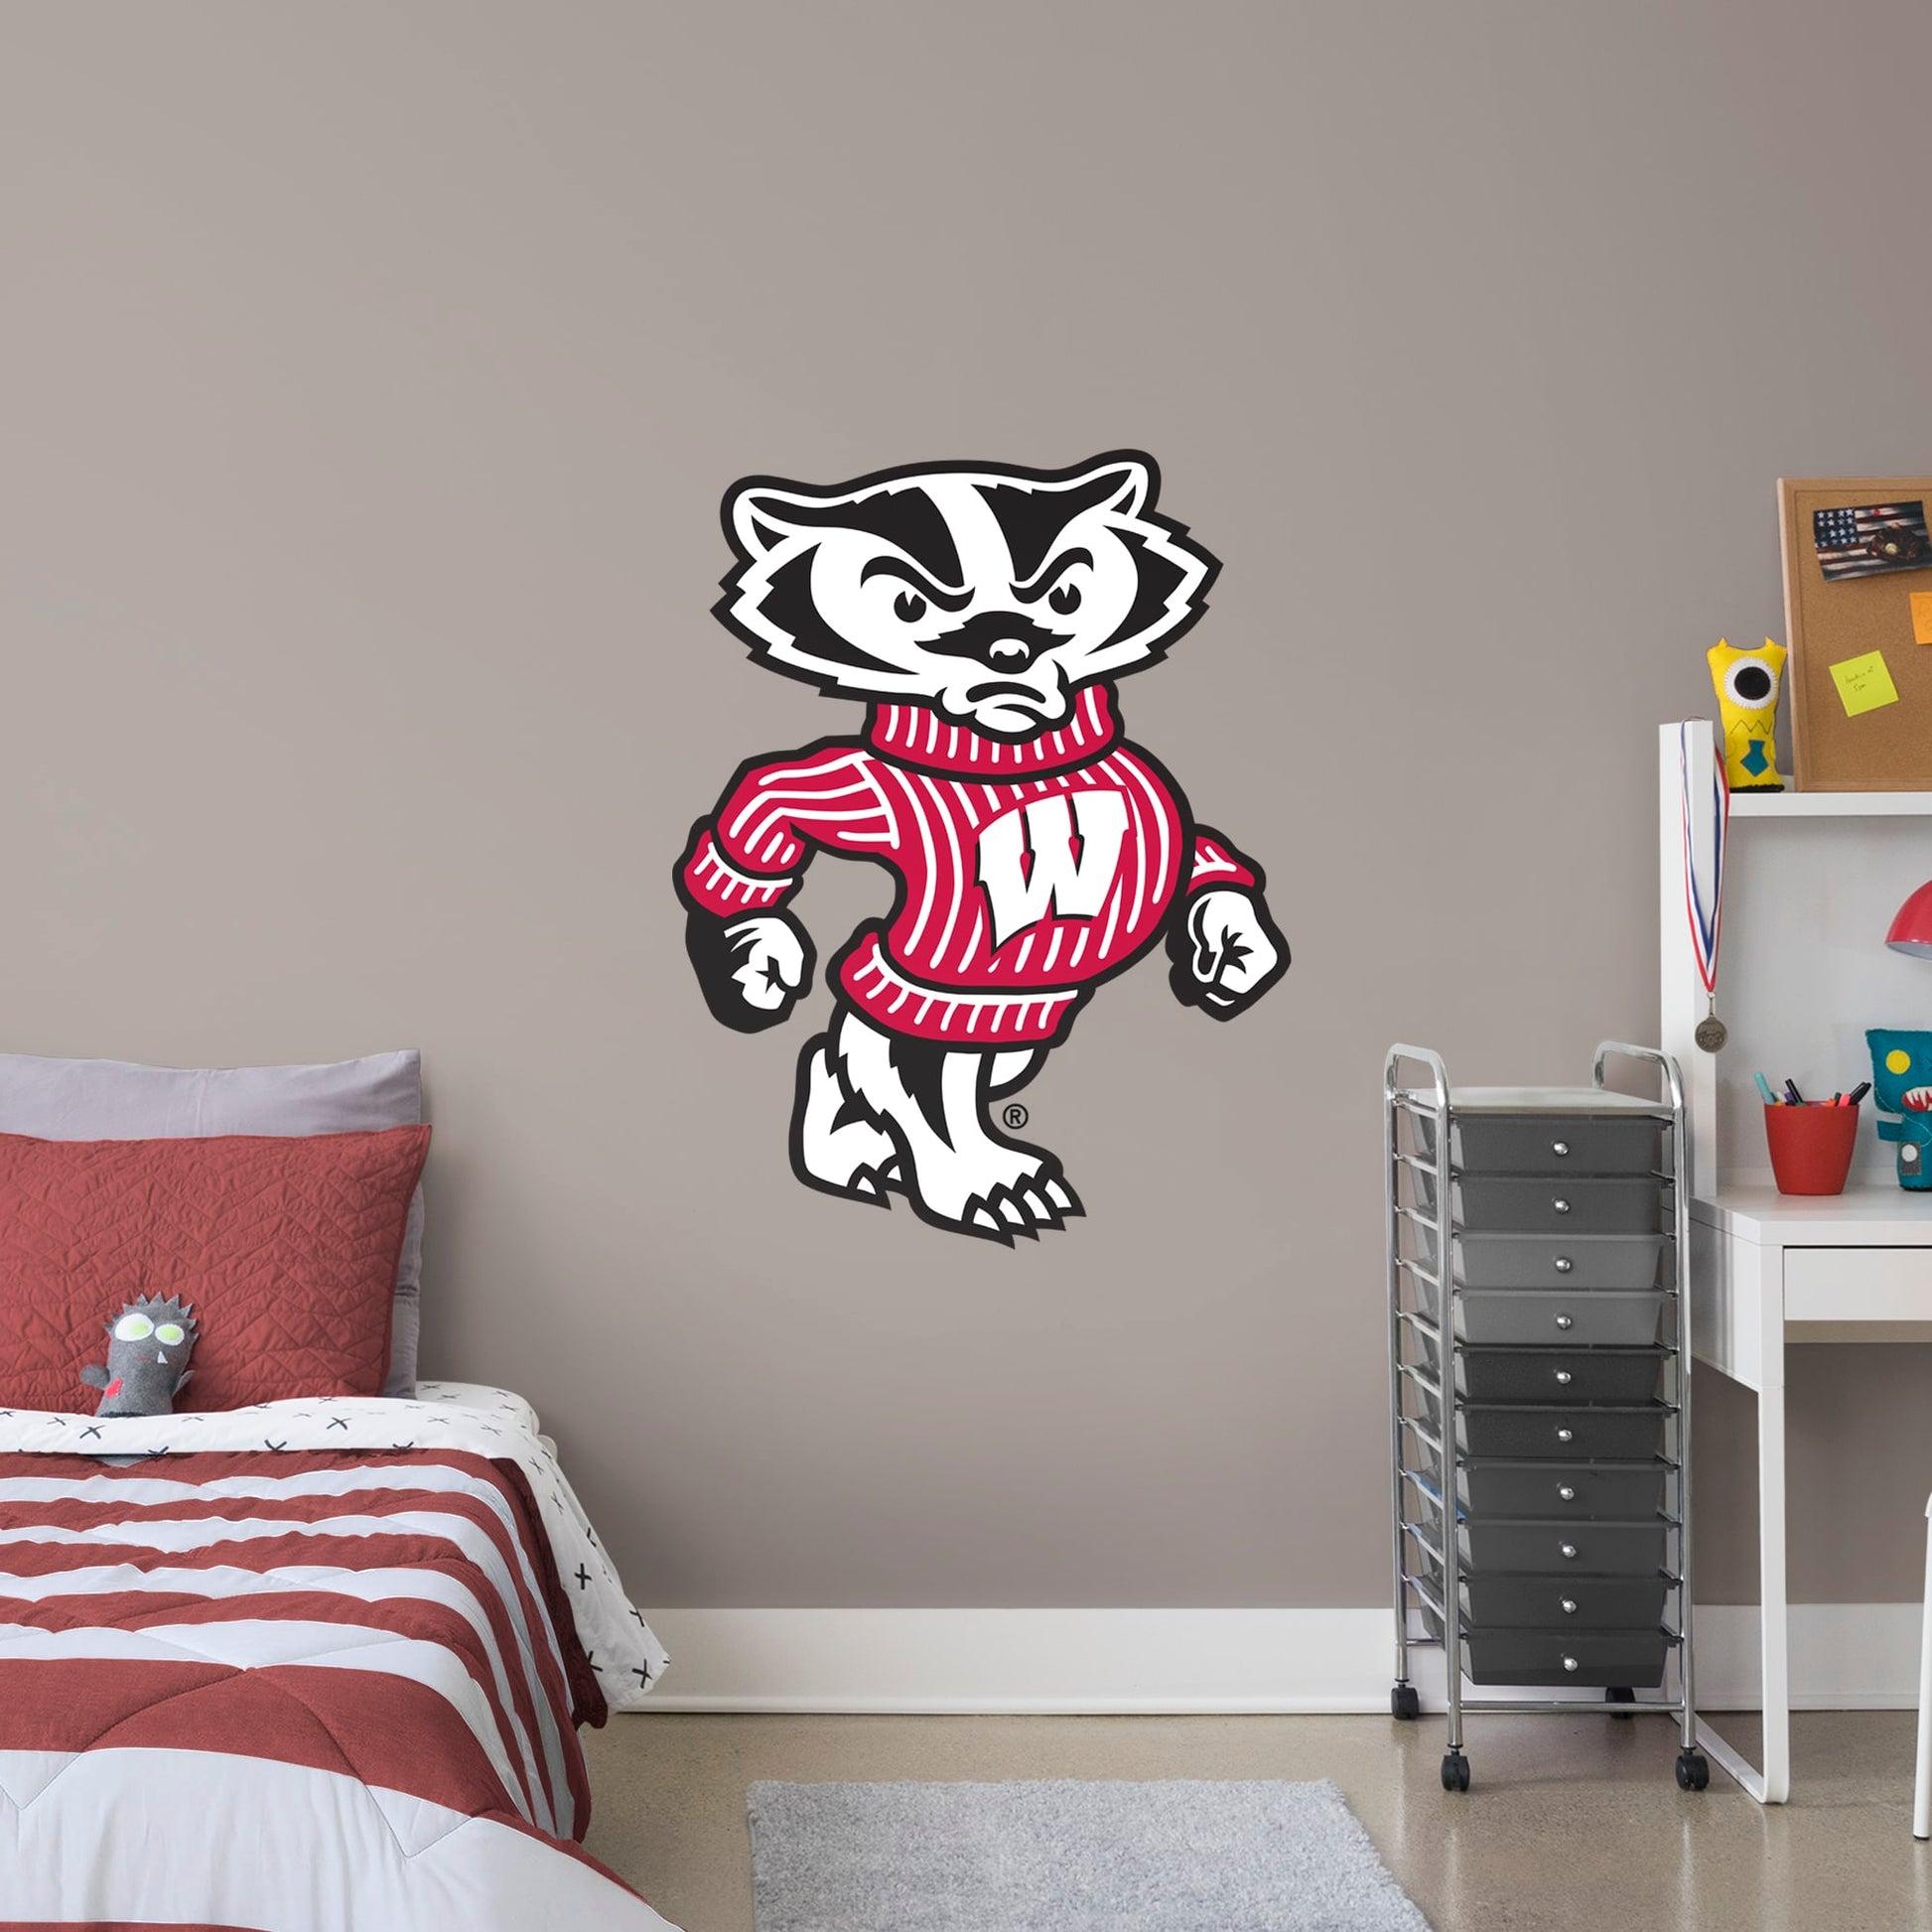 Life-Size Mascot + 2 Decals (48"W x 65"H)